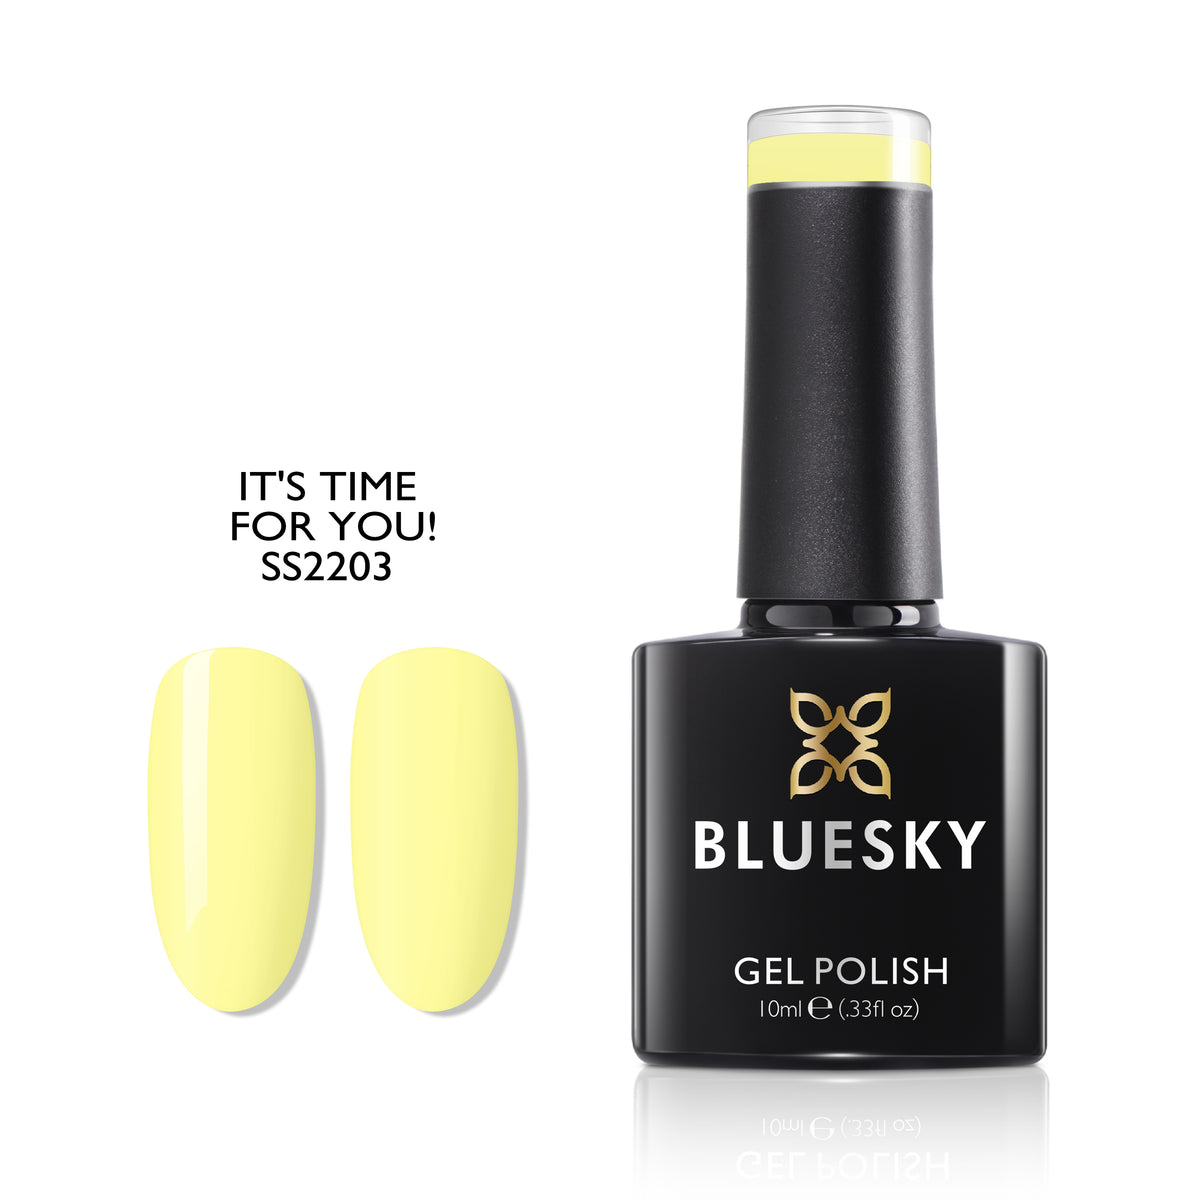  Bluesky Gel Polish  IT'S TIME FOR YOU ! SS2203